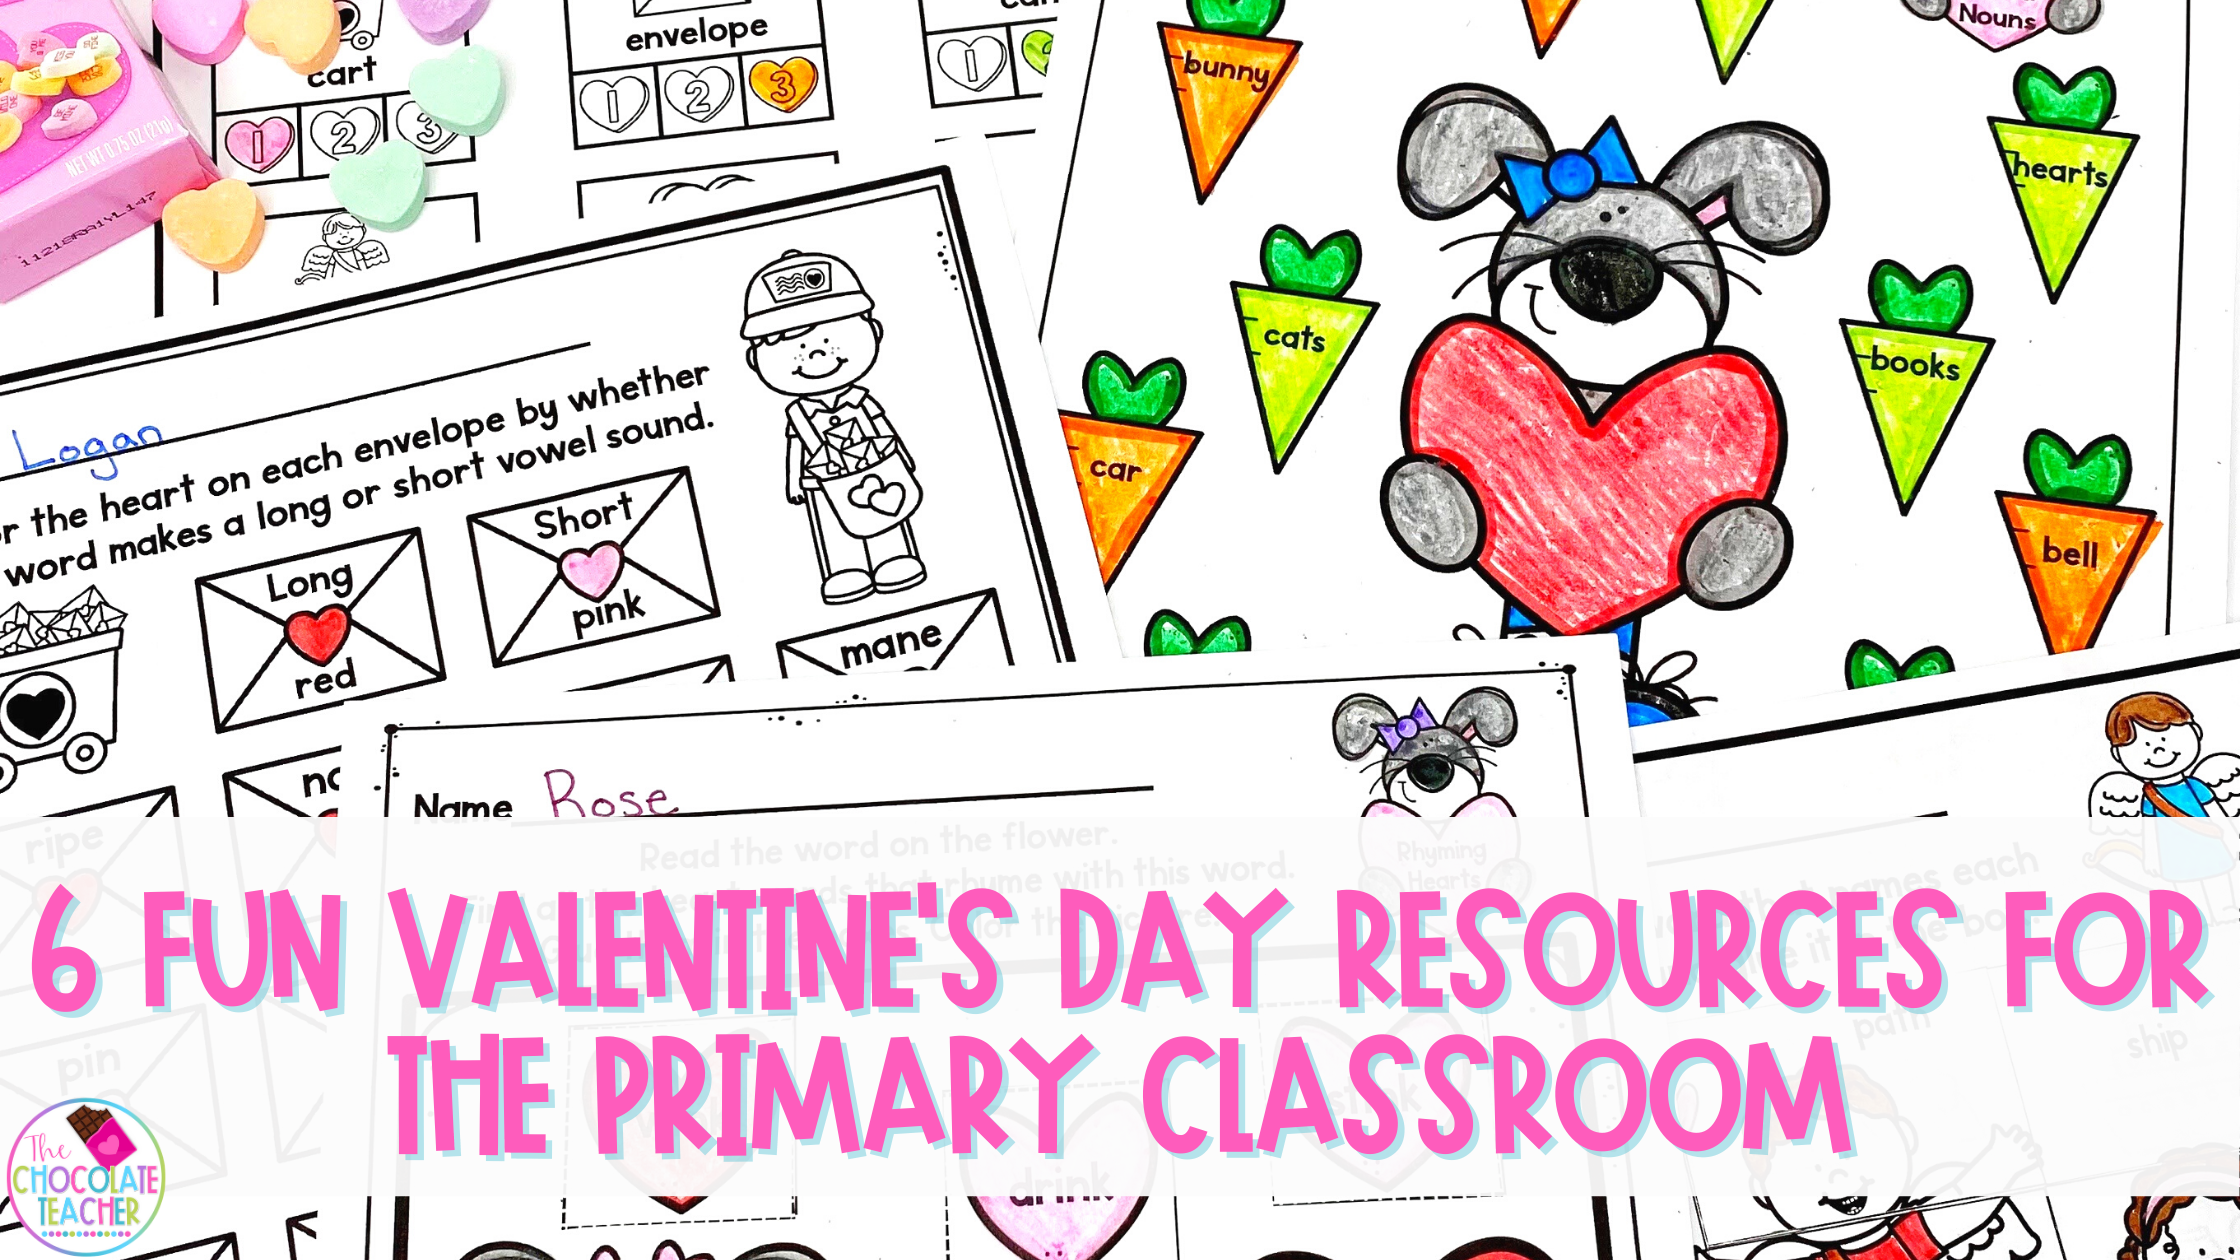 These 6 fun Valentine's Day resources for the primary classroom are not only fun but also help your kiddos keep practicing important standards during the month of February.